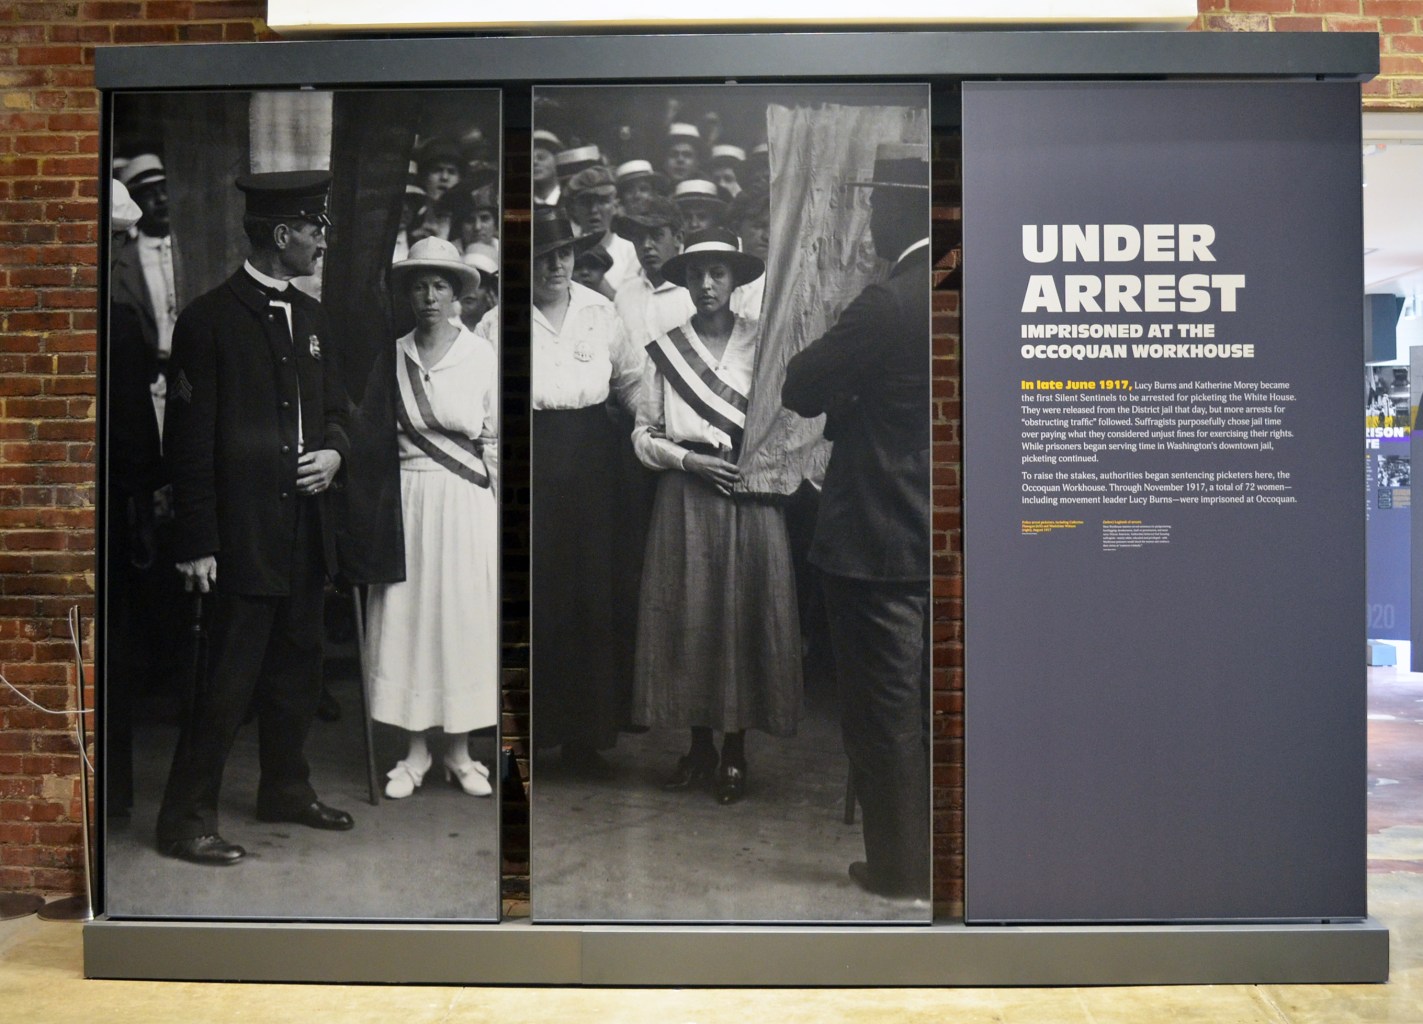 A panel display in a museum showing photos of suffragists facing uniformed men. The text reads "Under Arrest: Imprisoned at the Occoquan Workhouse."